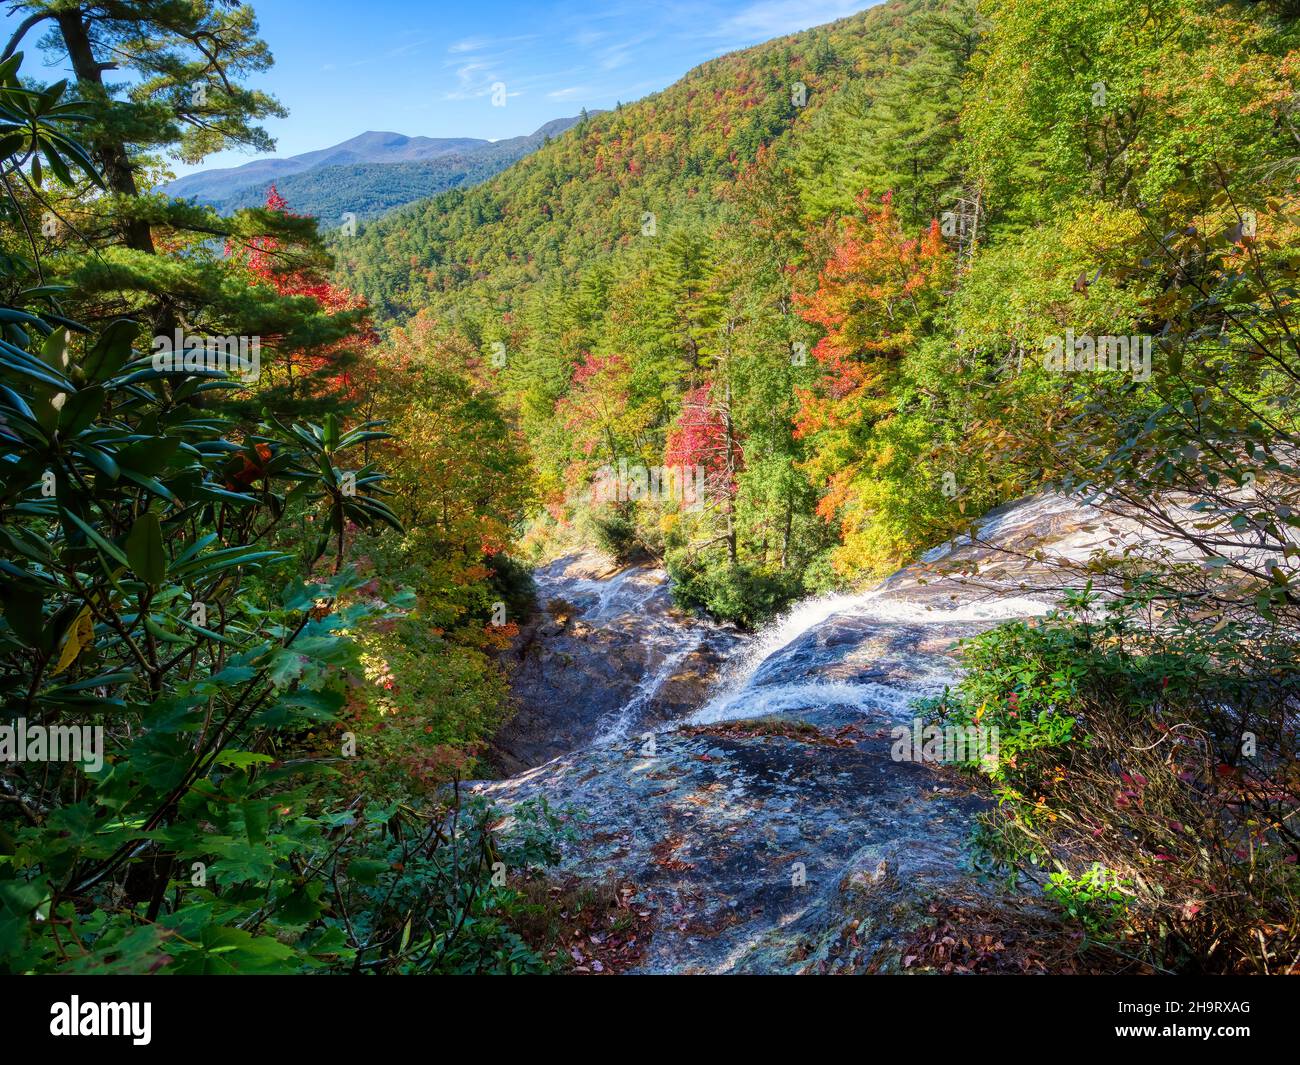 Top of Glen Falls on the East Fork Overflow Creek in the Nantahala National Forest near Highlands North Carolina USA Stock Photo